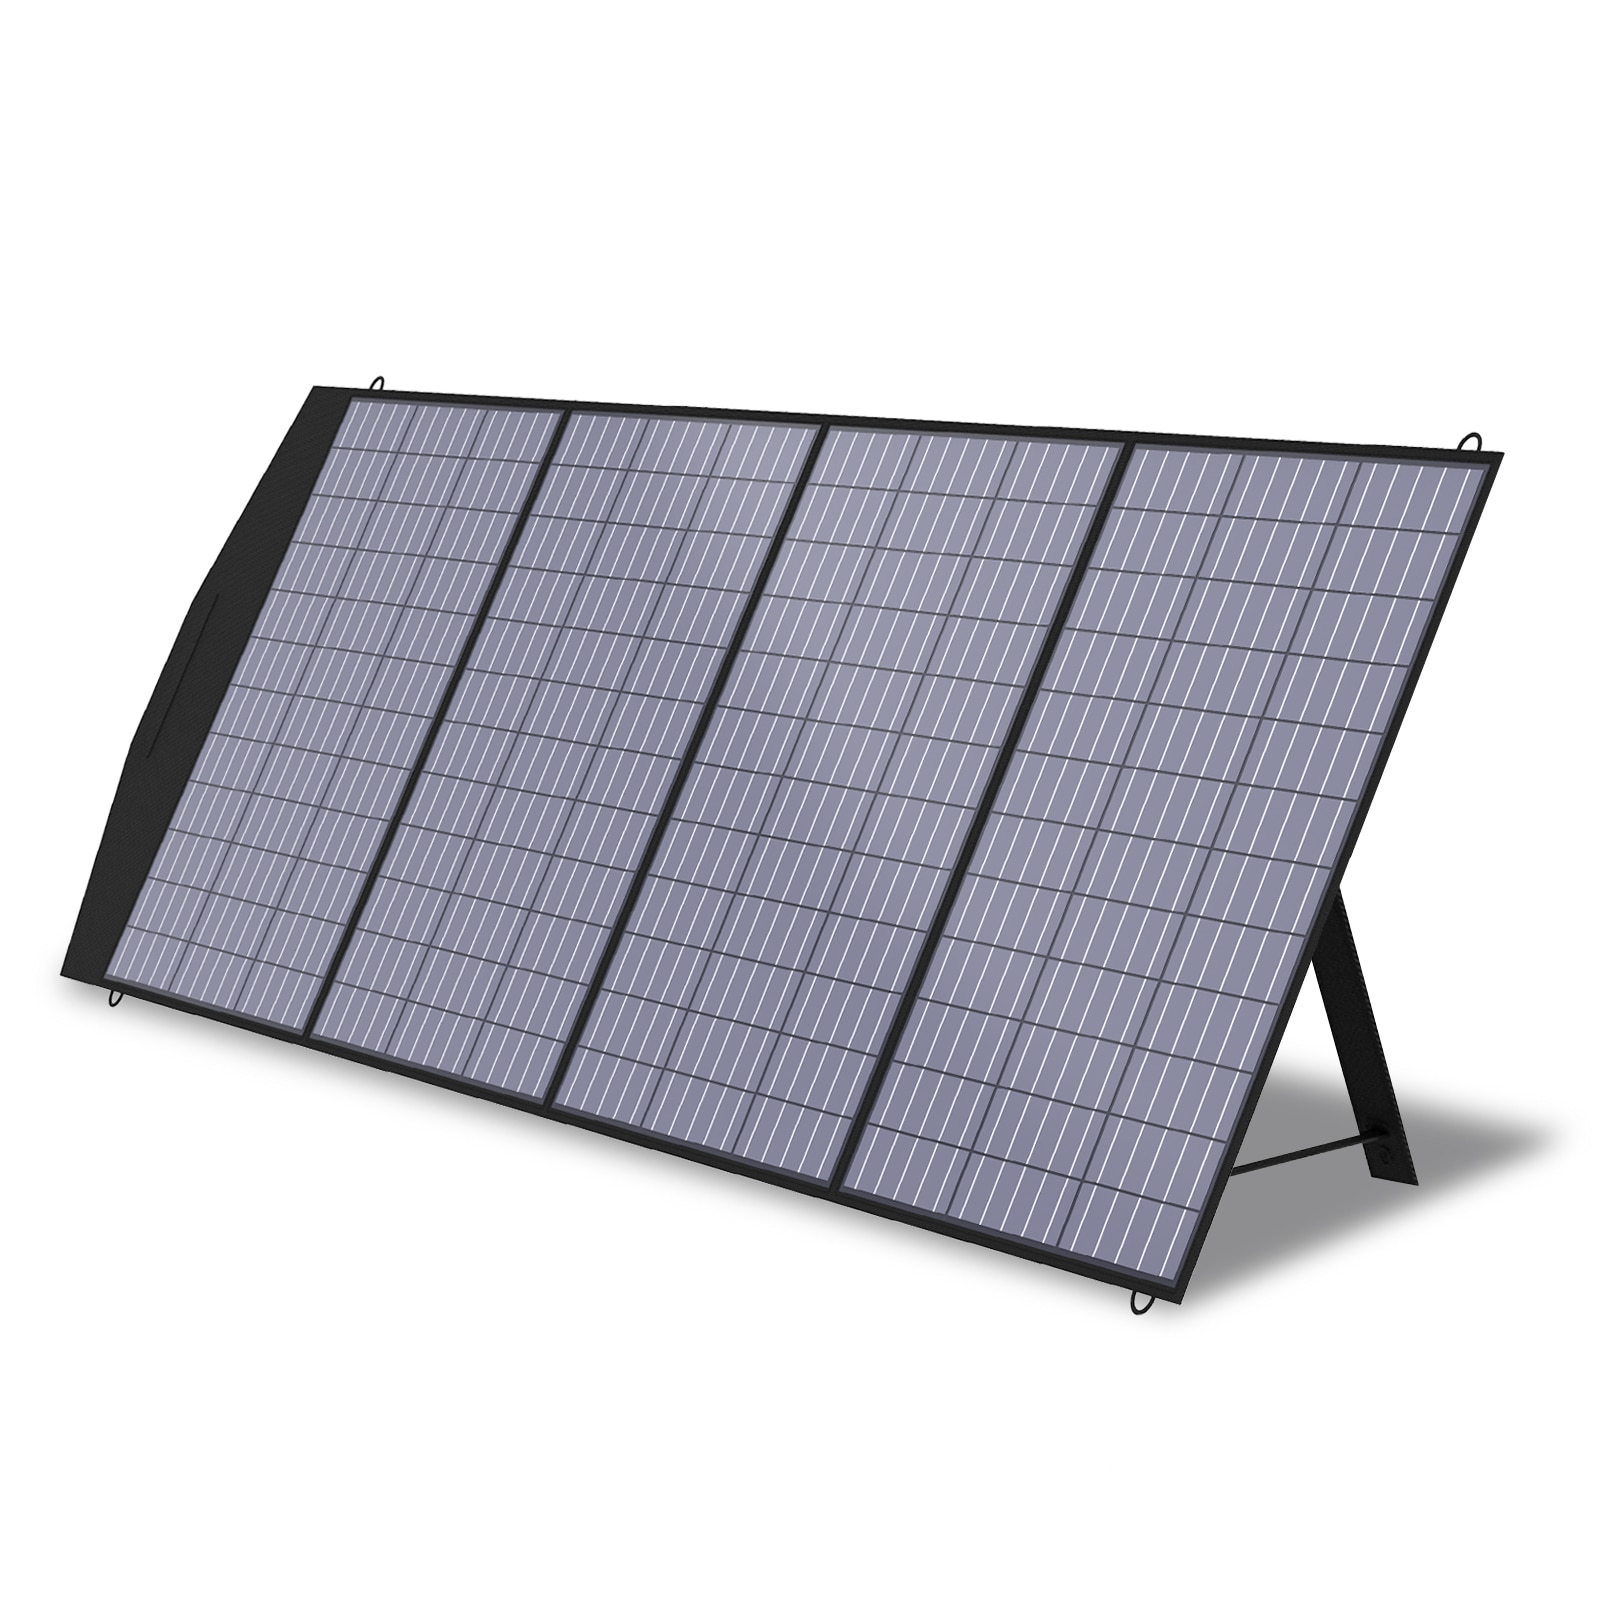 ALLPOWERS Portable Foldable Solar Panel Charger 18V 200W Solar Panel Kit with MC-4 Output for Laptops, RV, Power Station,Camping